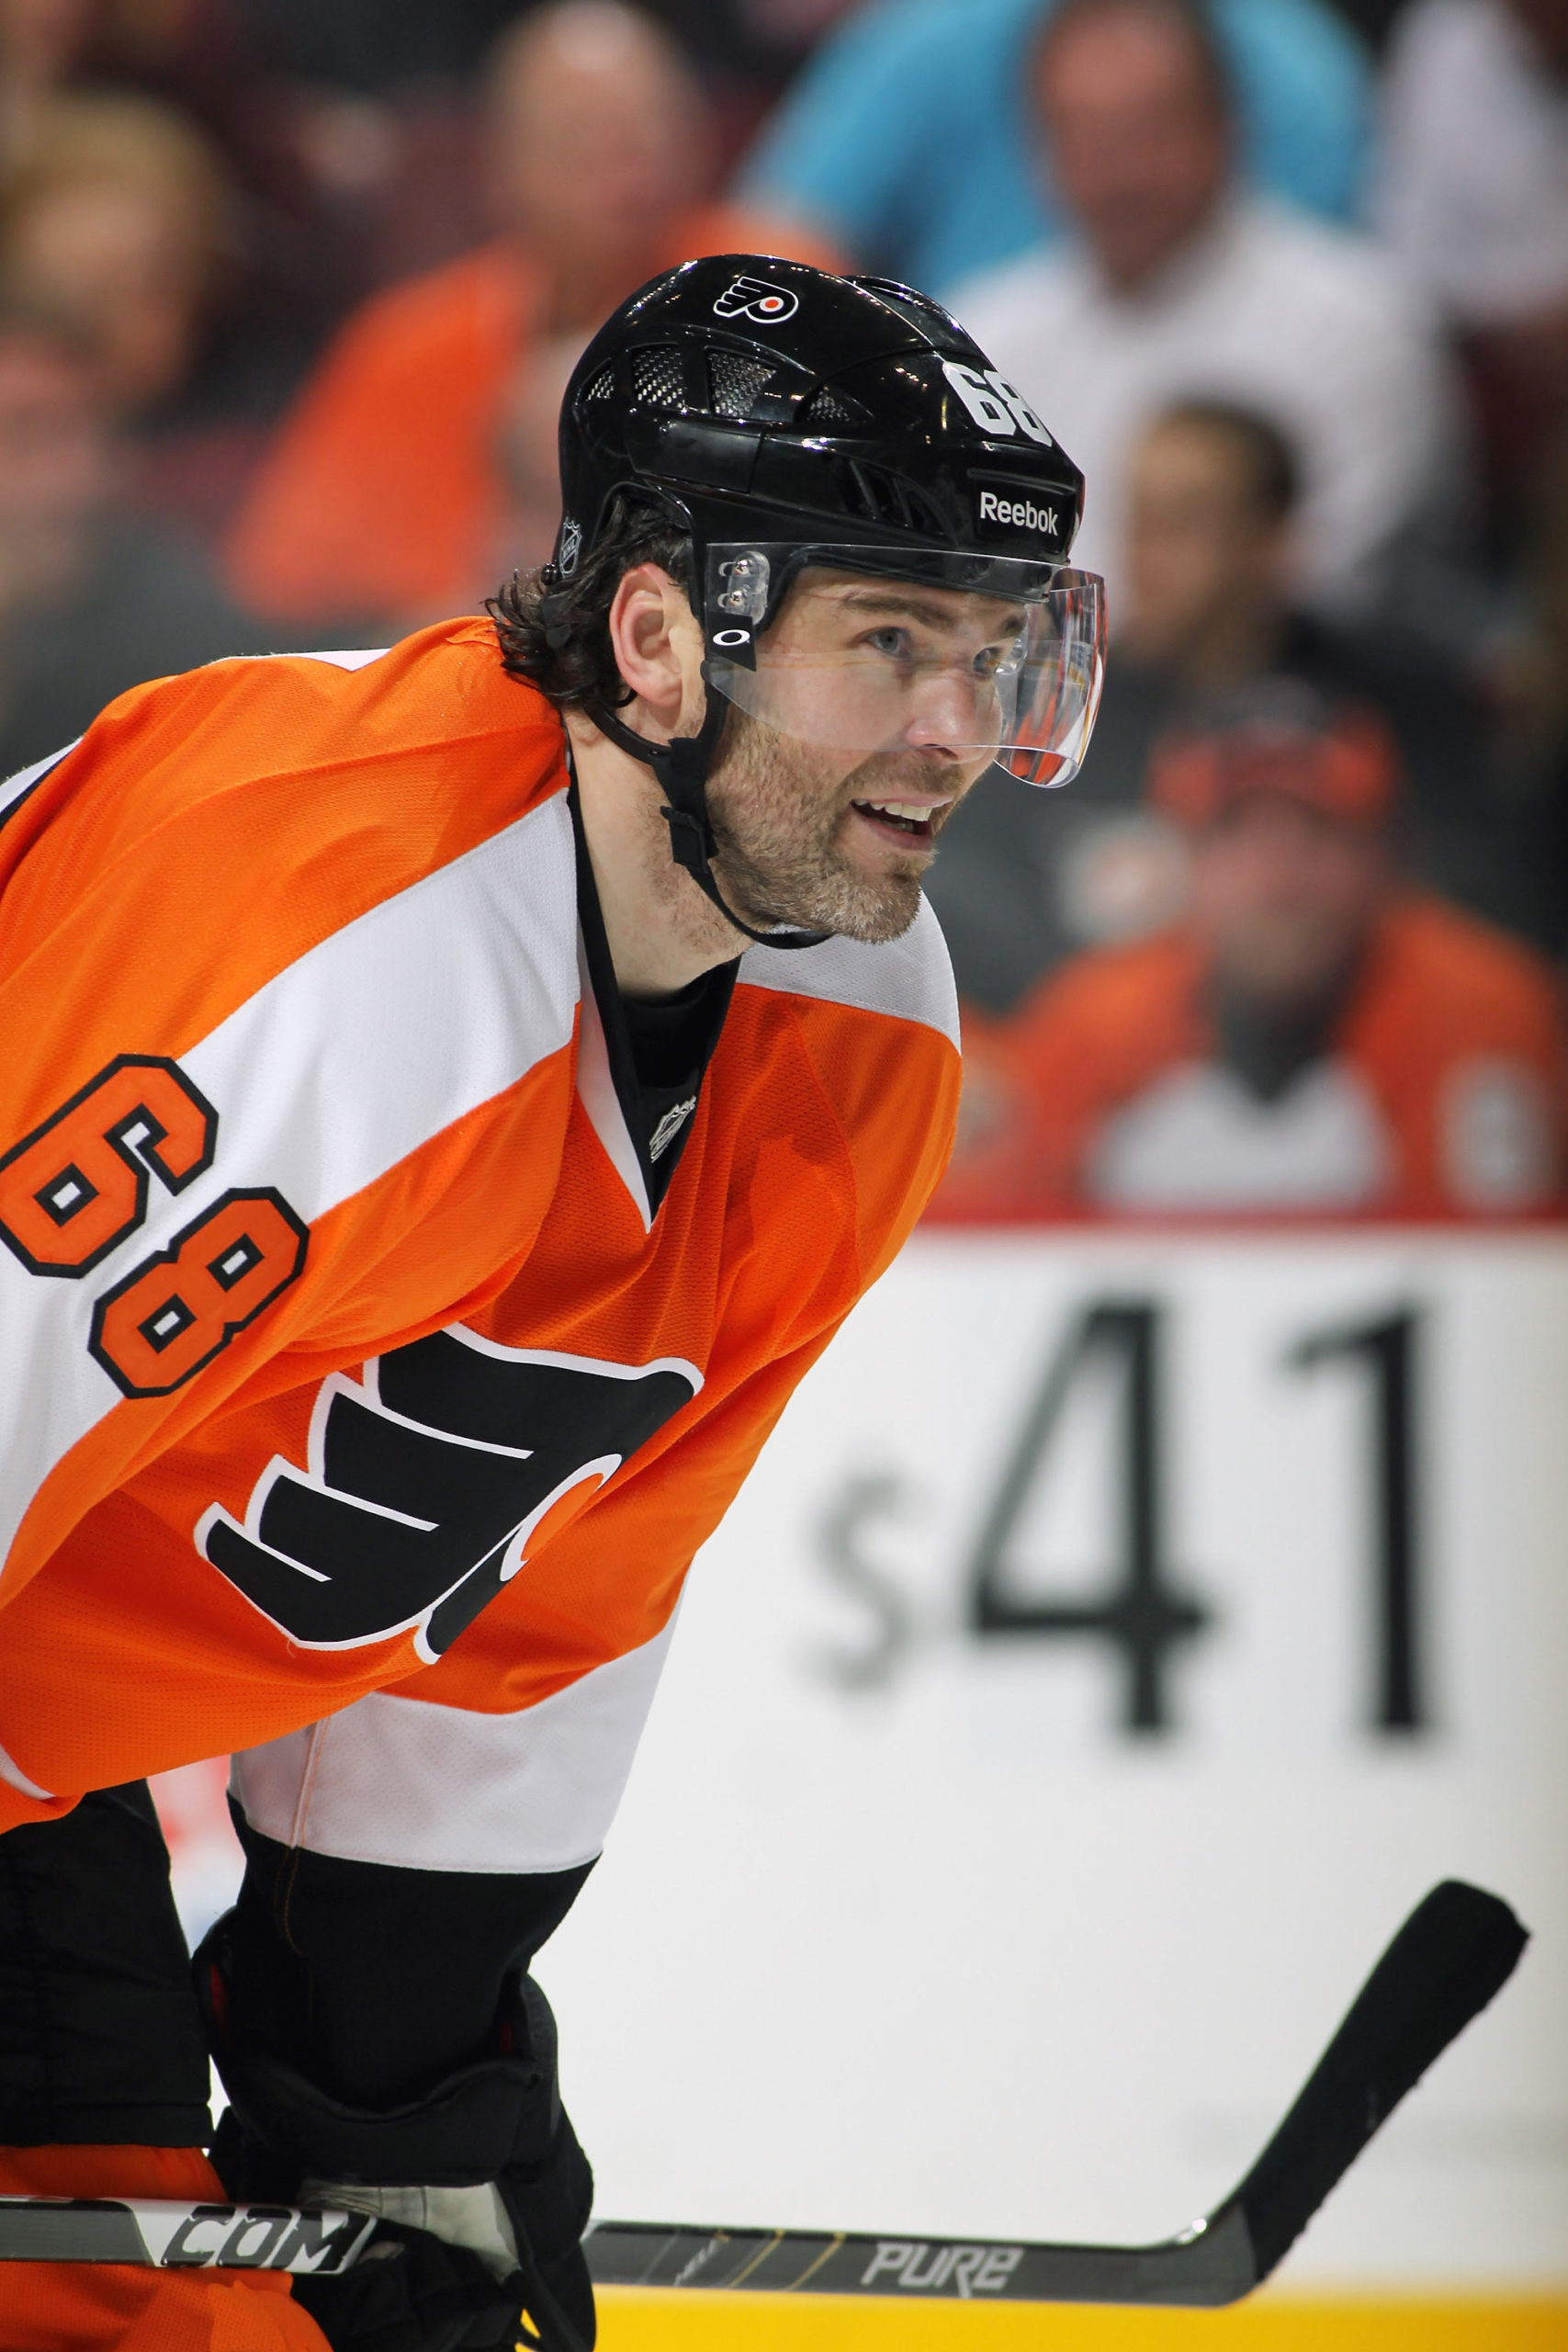 Jagr, back from injuries, plays in Czech second-league game